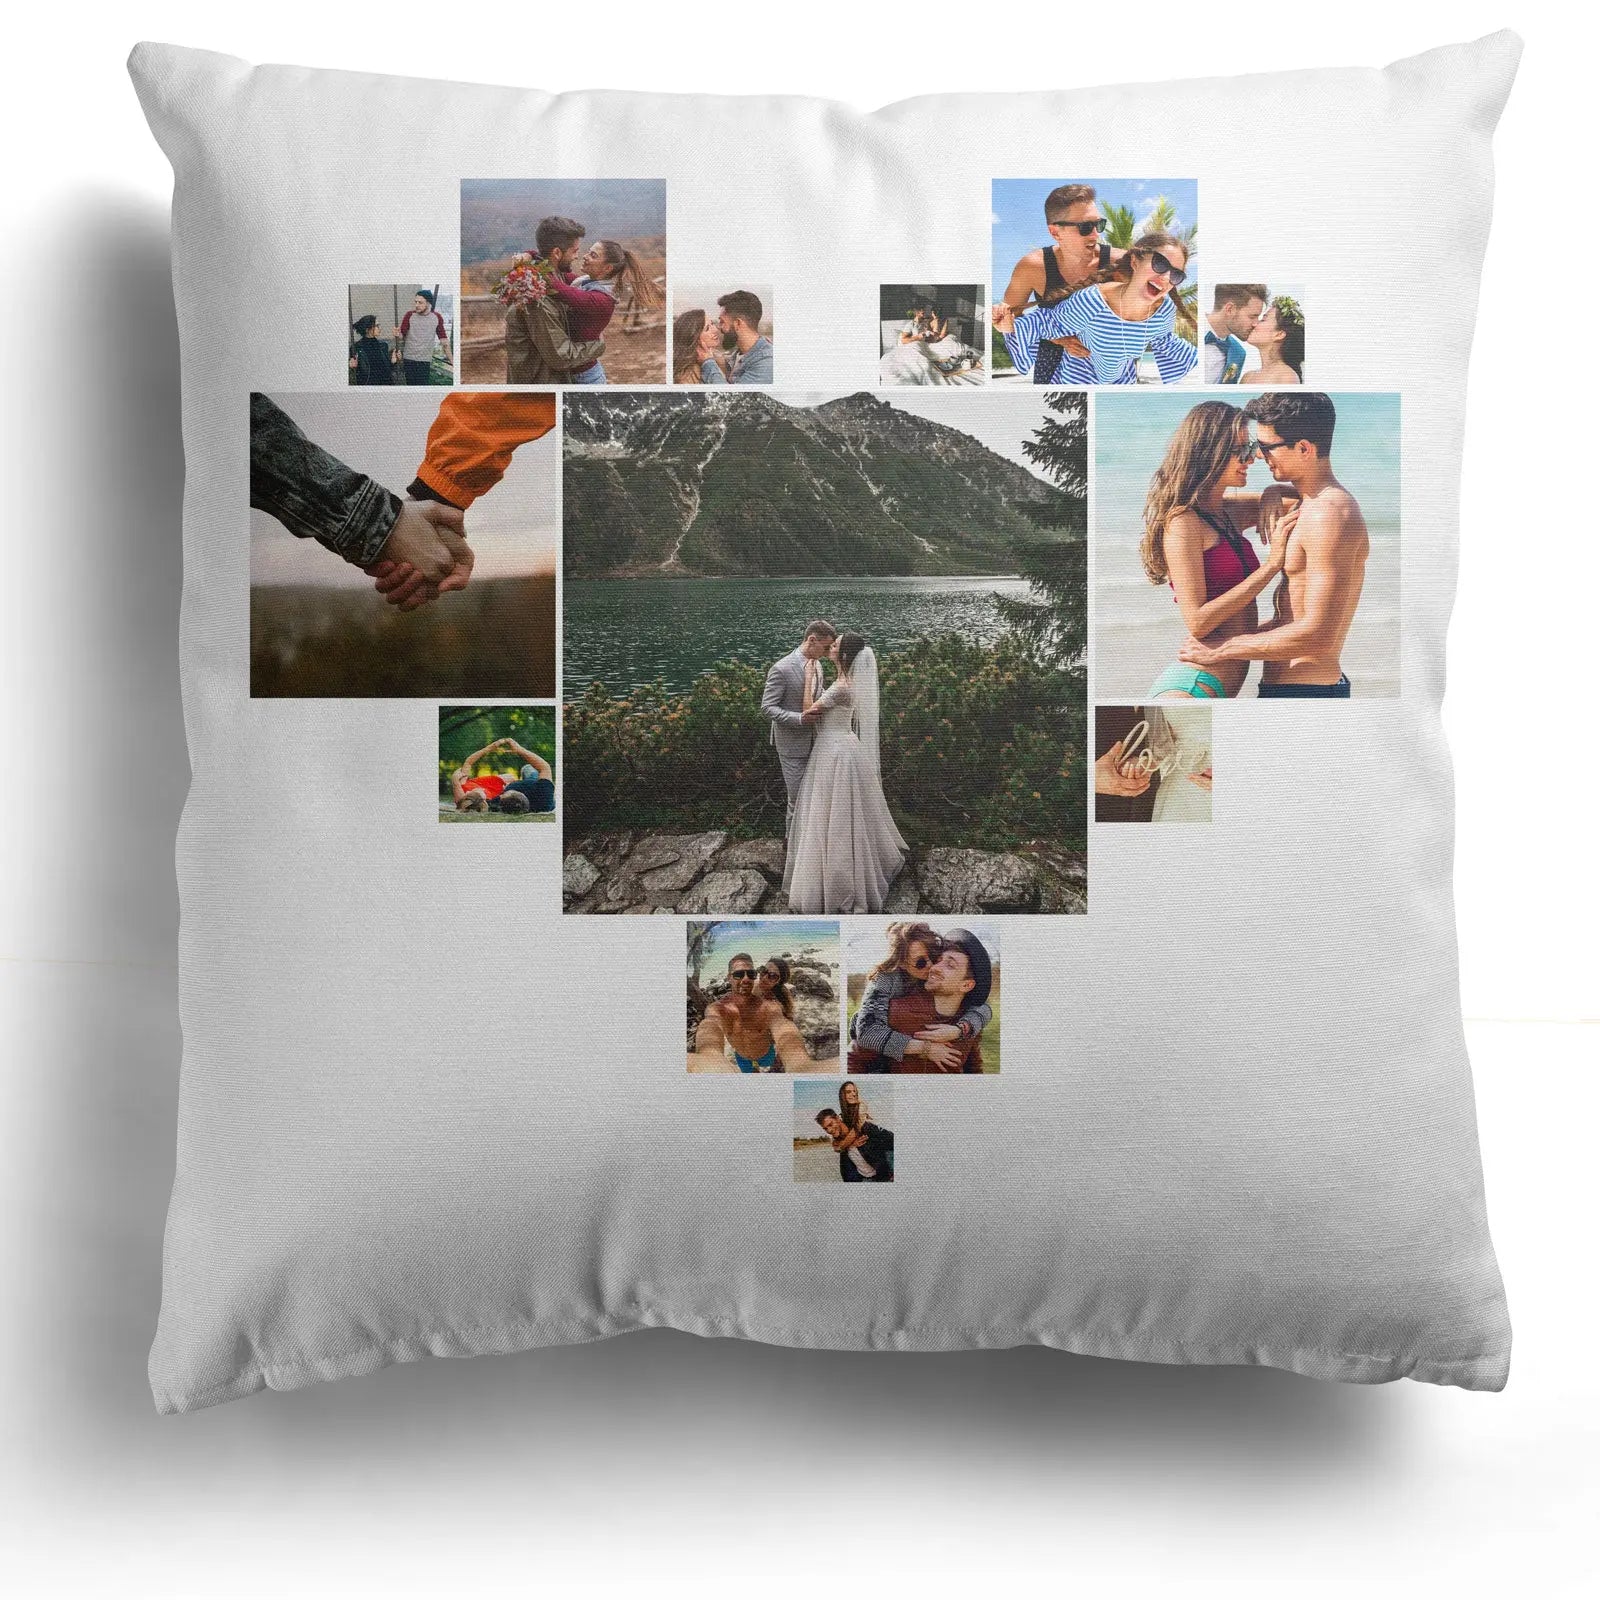 Personalised Cushion  Valentines Day  Couples & Romance  40x40cm  Heart